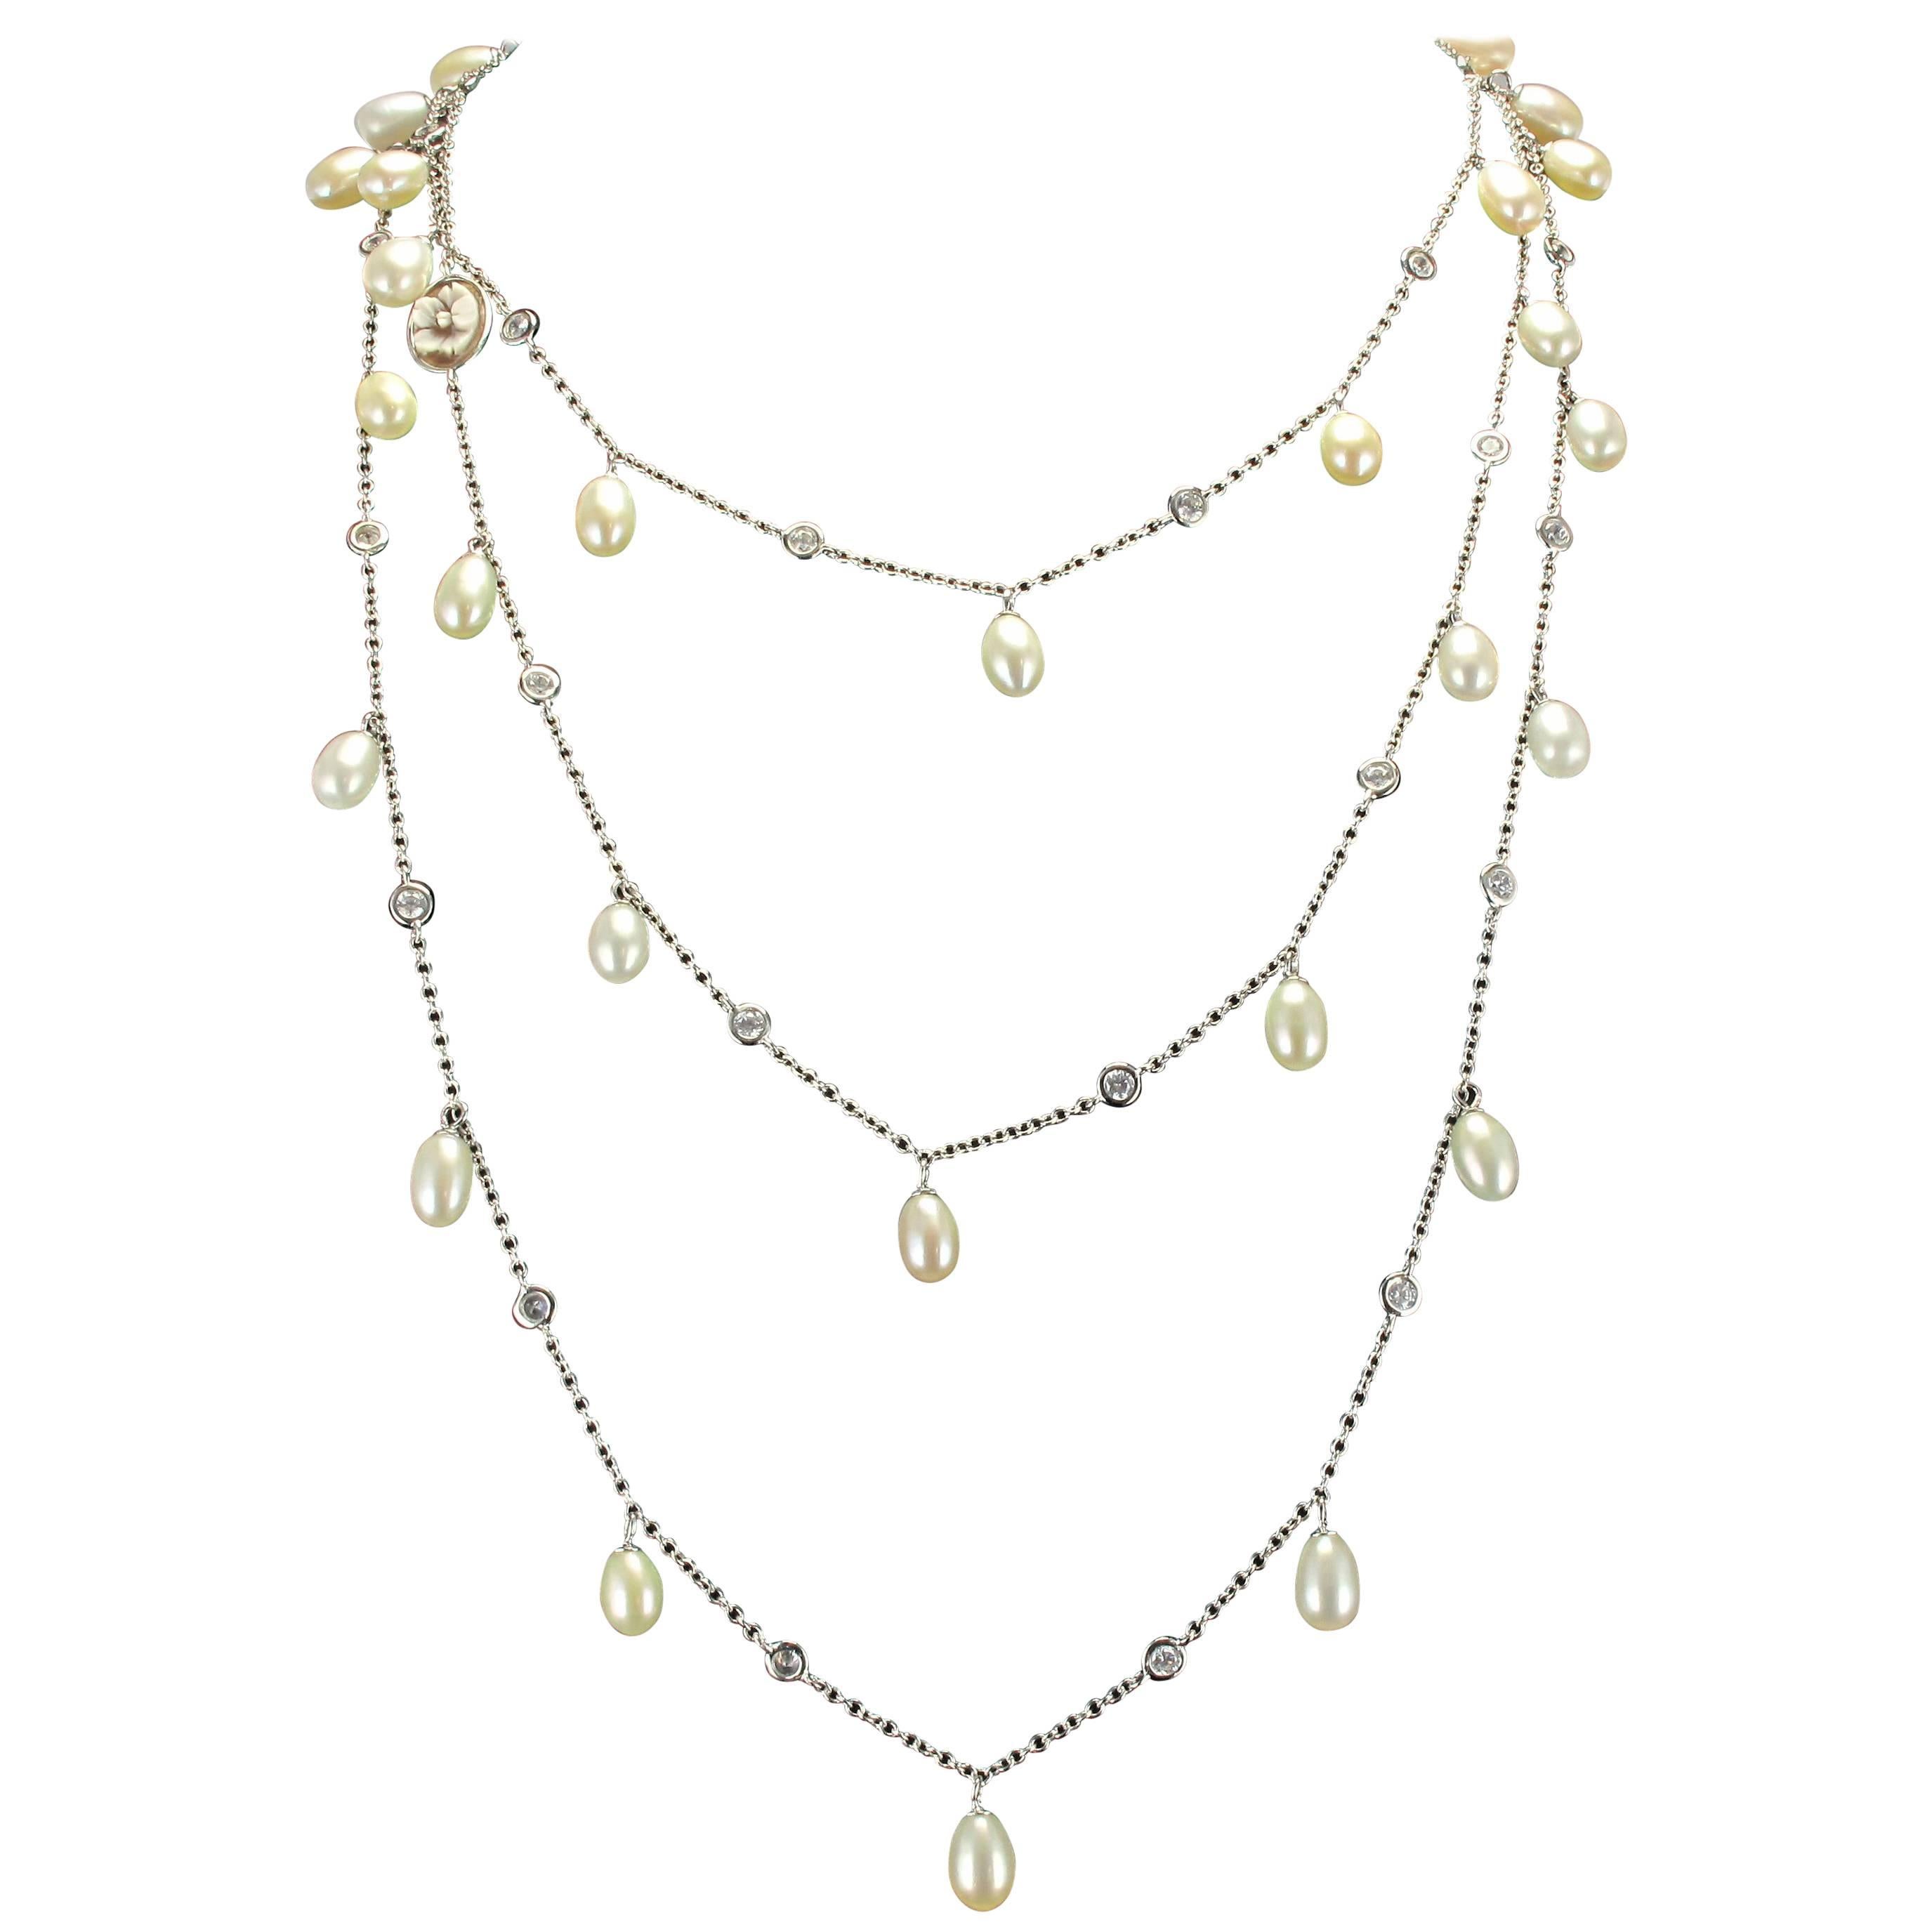 Italian White Vermeil Cultured Pearls Crystals Cameo Long Necklace